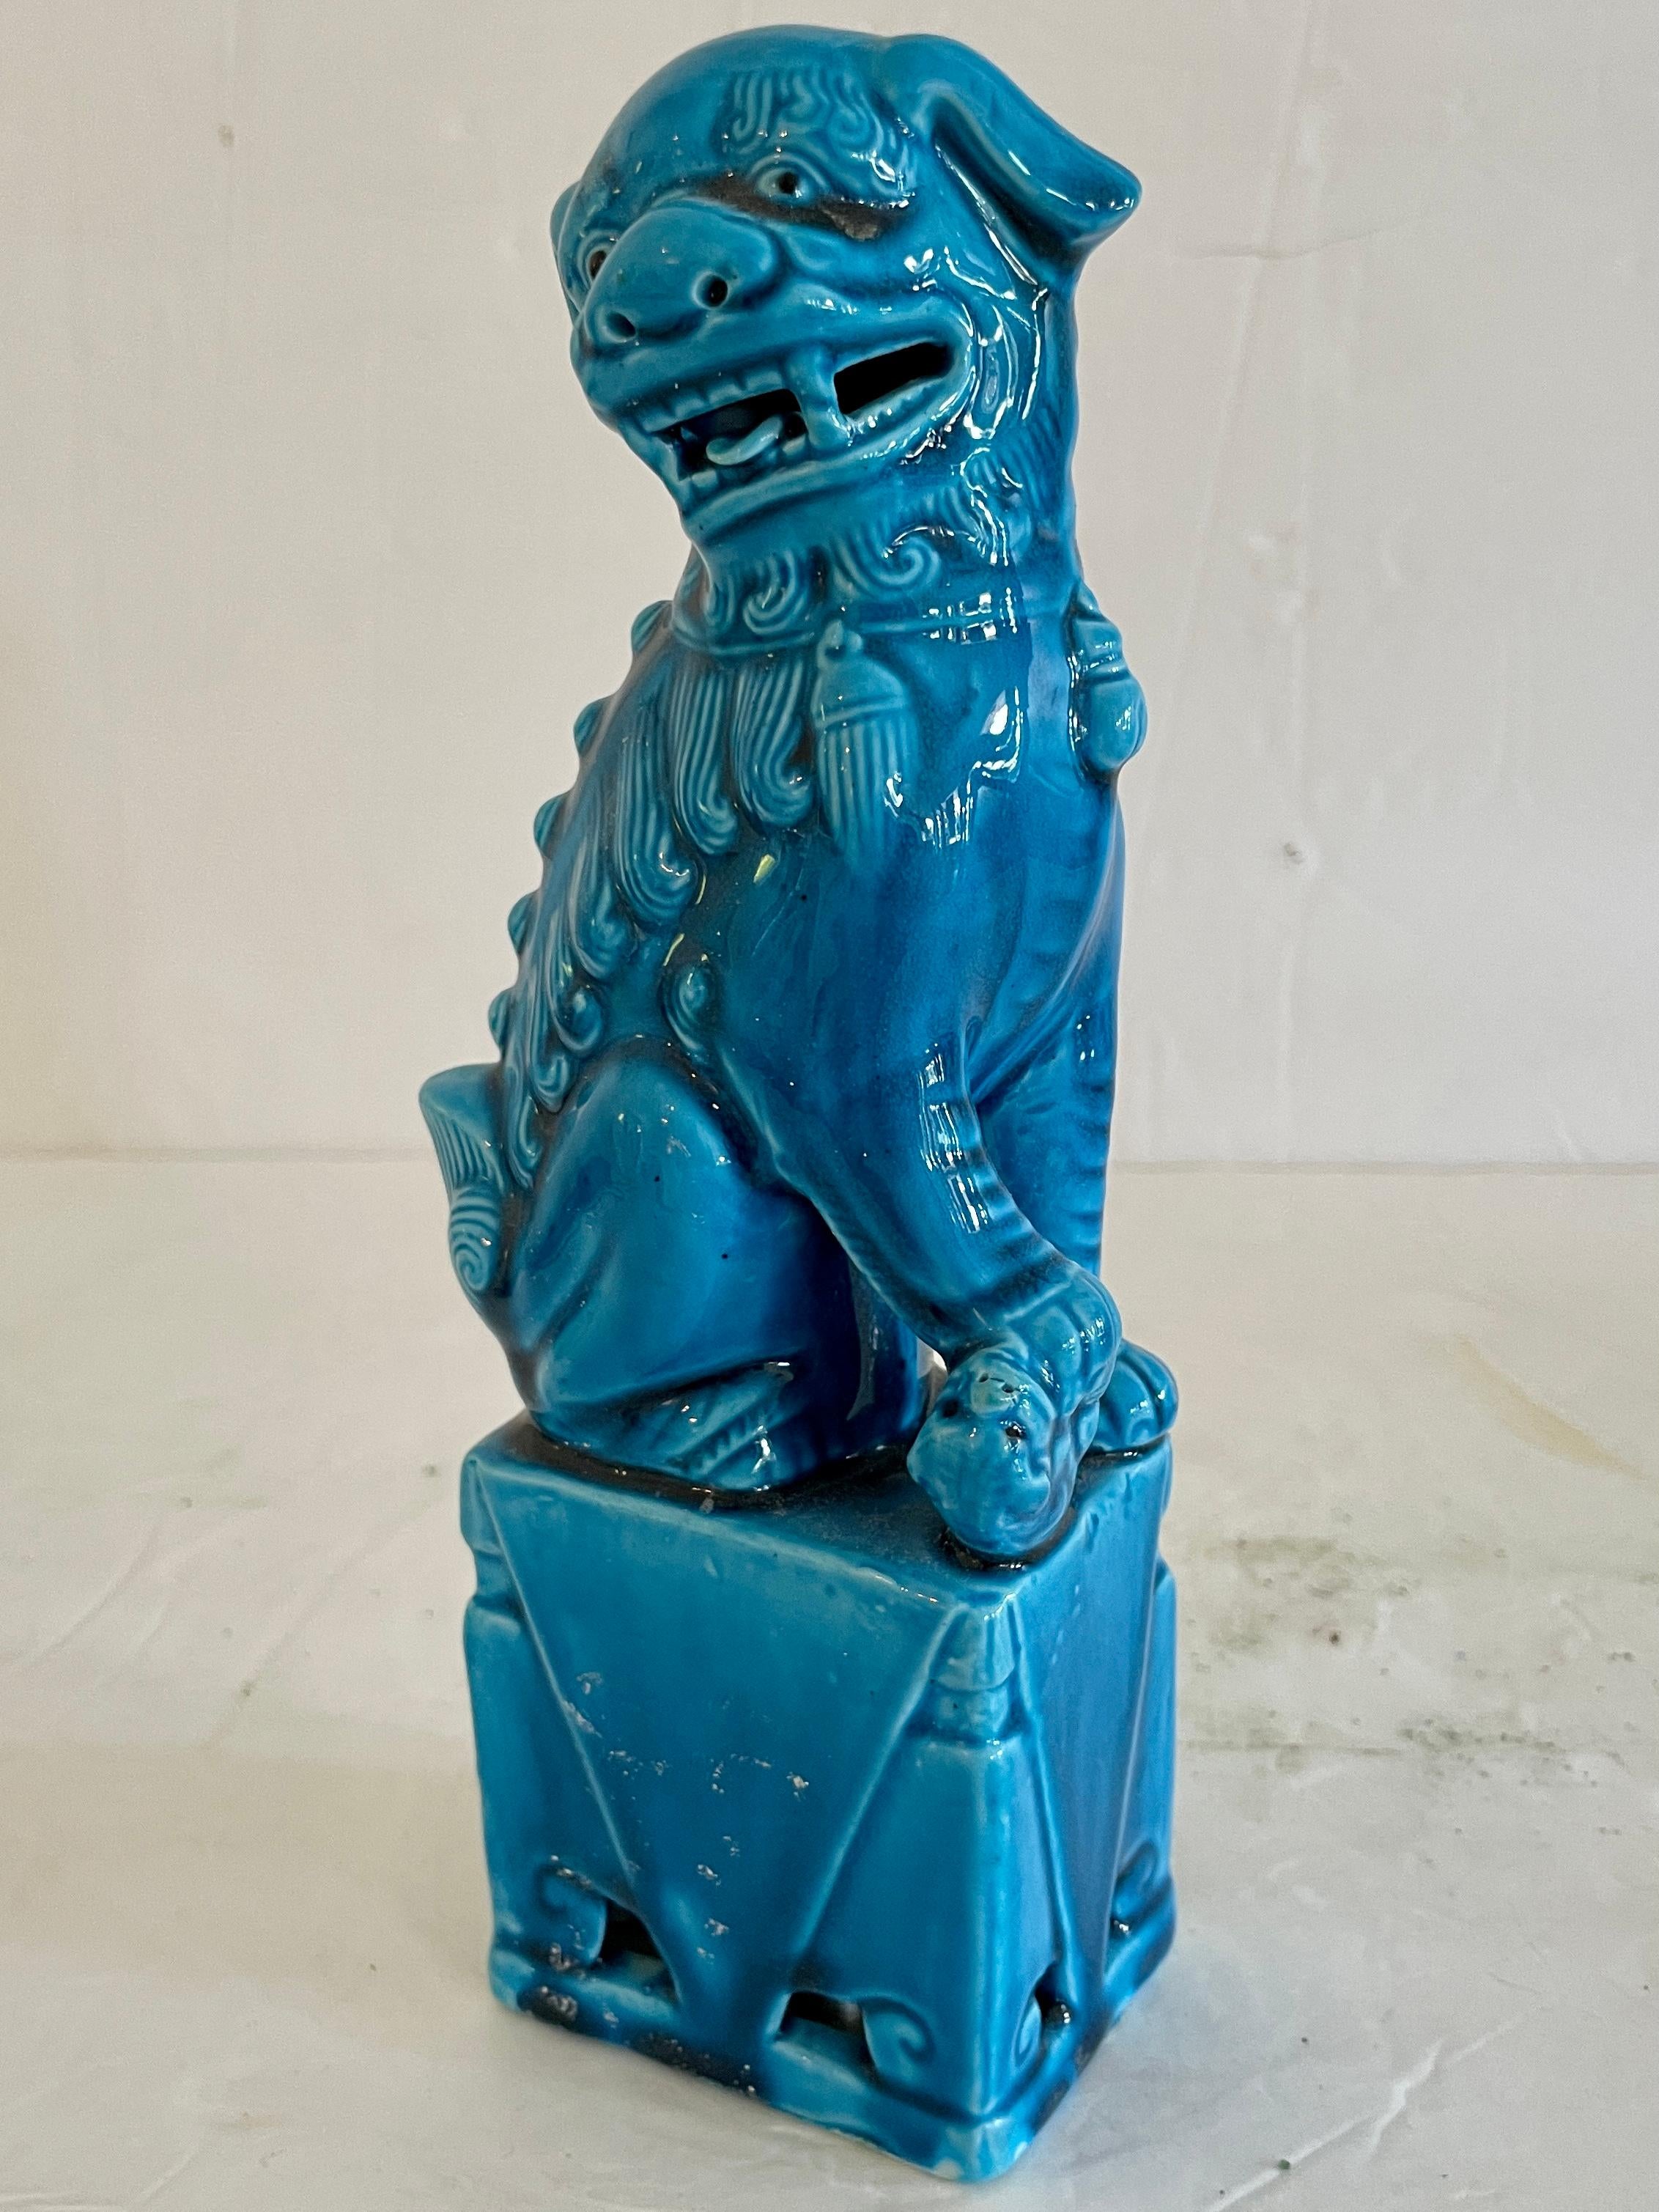 Fabulous single ceramic Asian turquoise female foo dog. The carving details are amazing. Great addition to your chinoiserie collection.